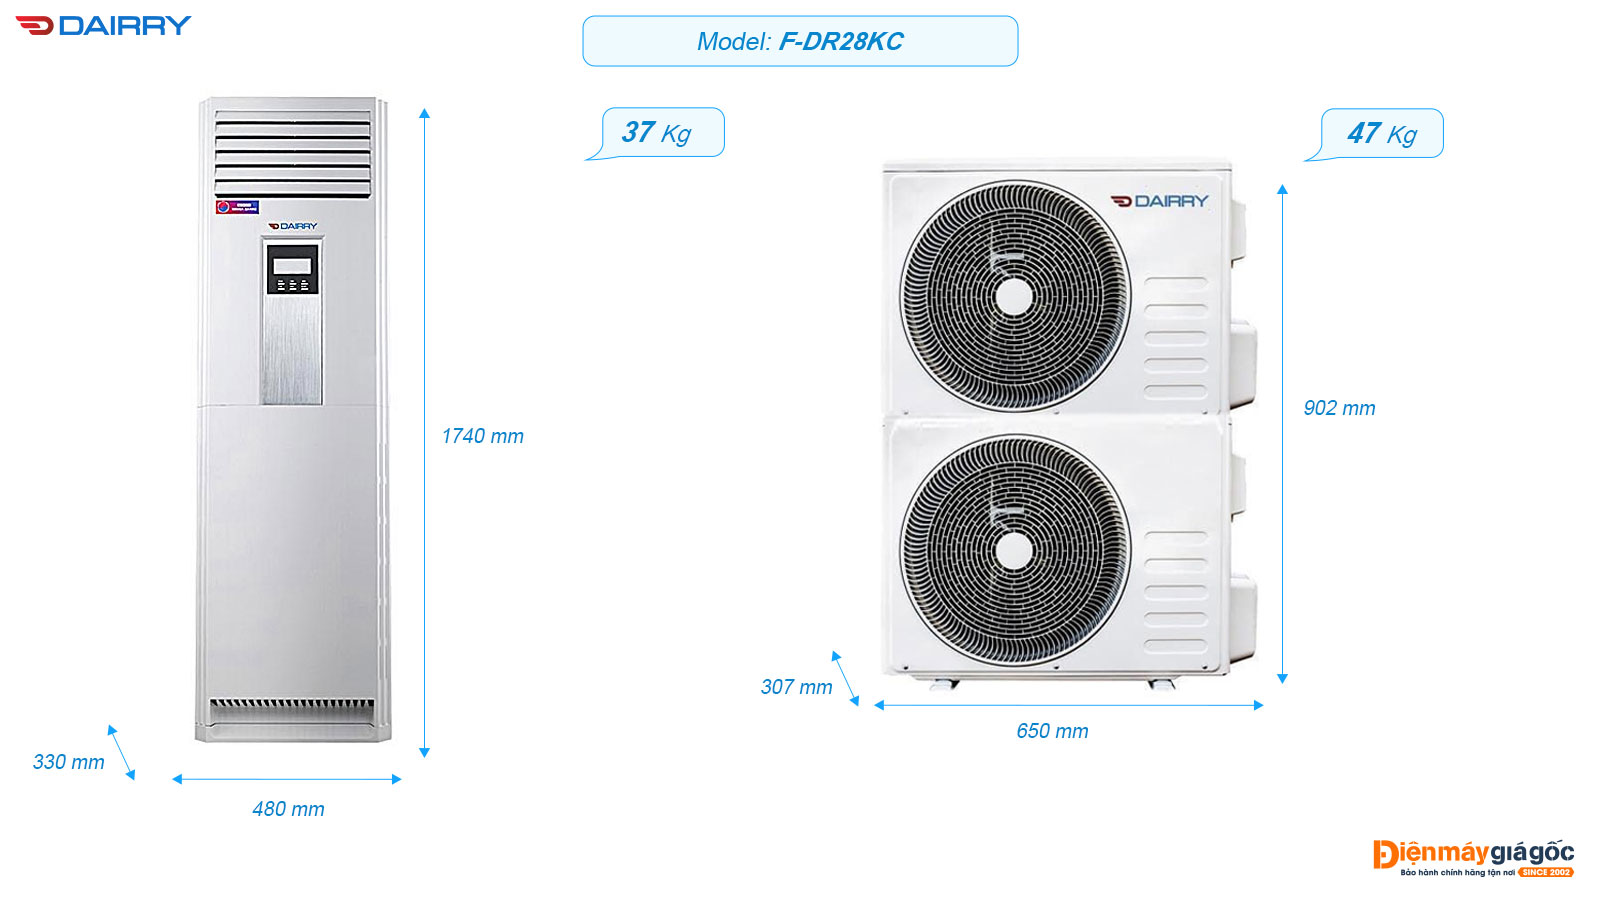 Dairry floor standing air conditioning F-DR28KC (3.0Hp)